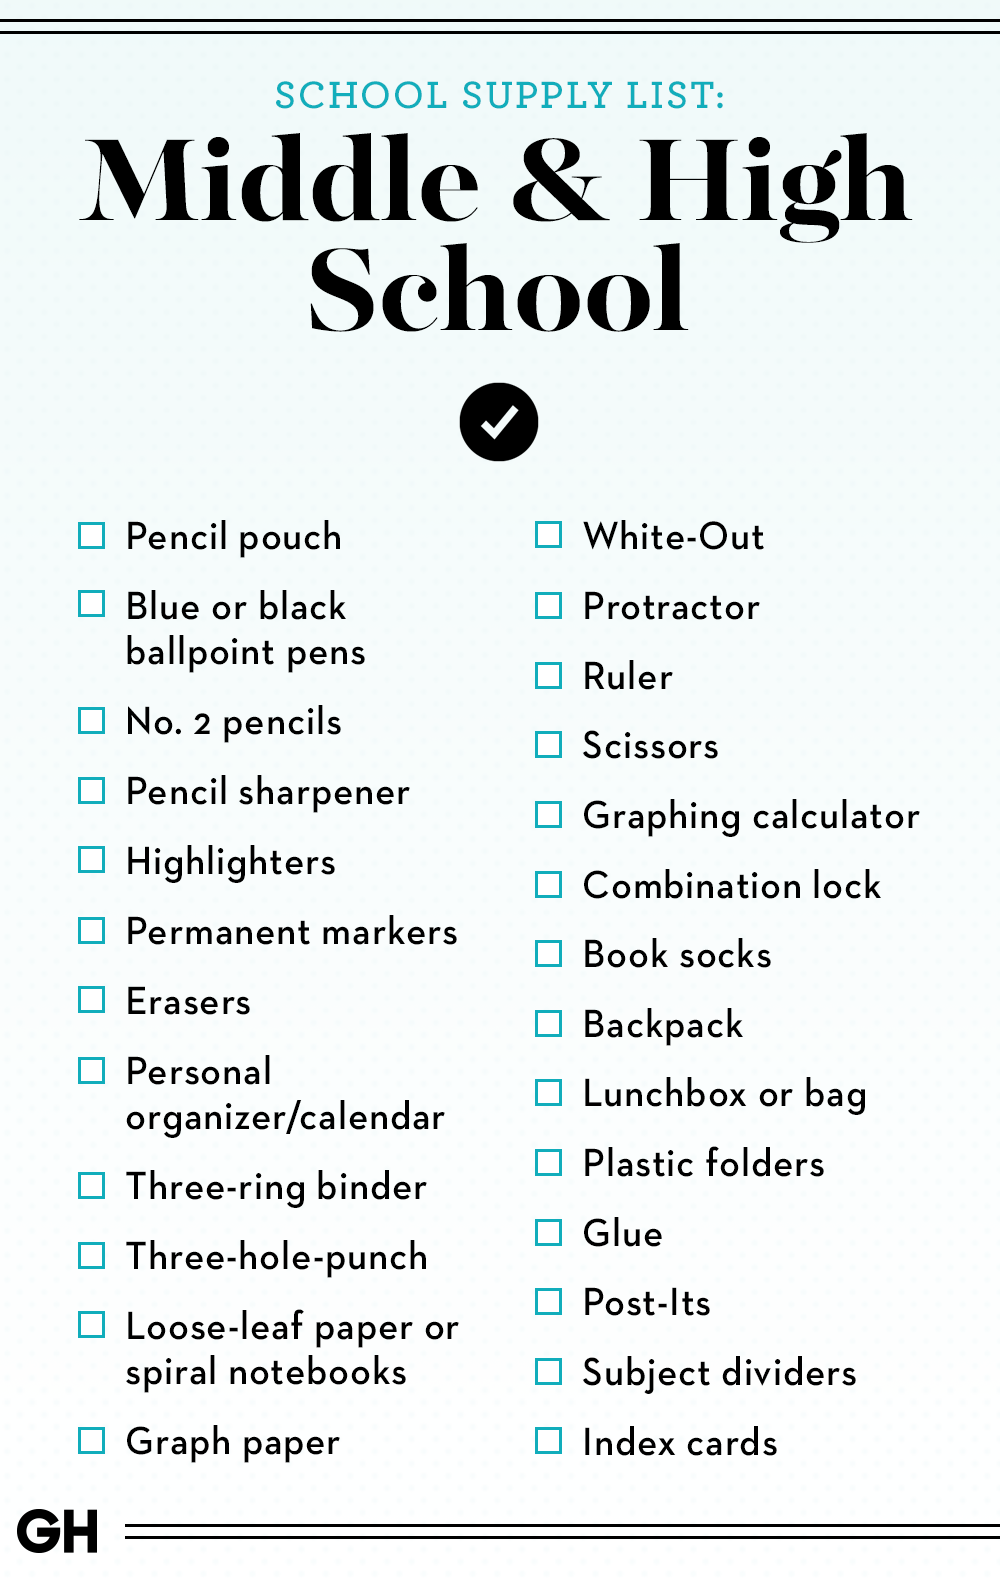 https://hips.hearstapps.com/hmg-prod/images/back-to-school-checklists-middle-and-high-school-1558037185.png